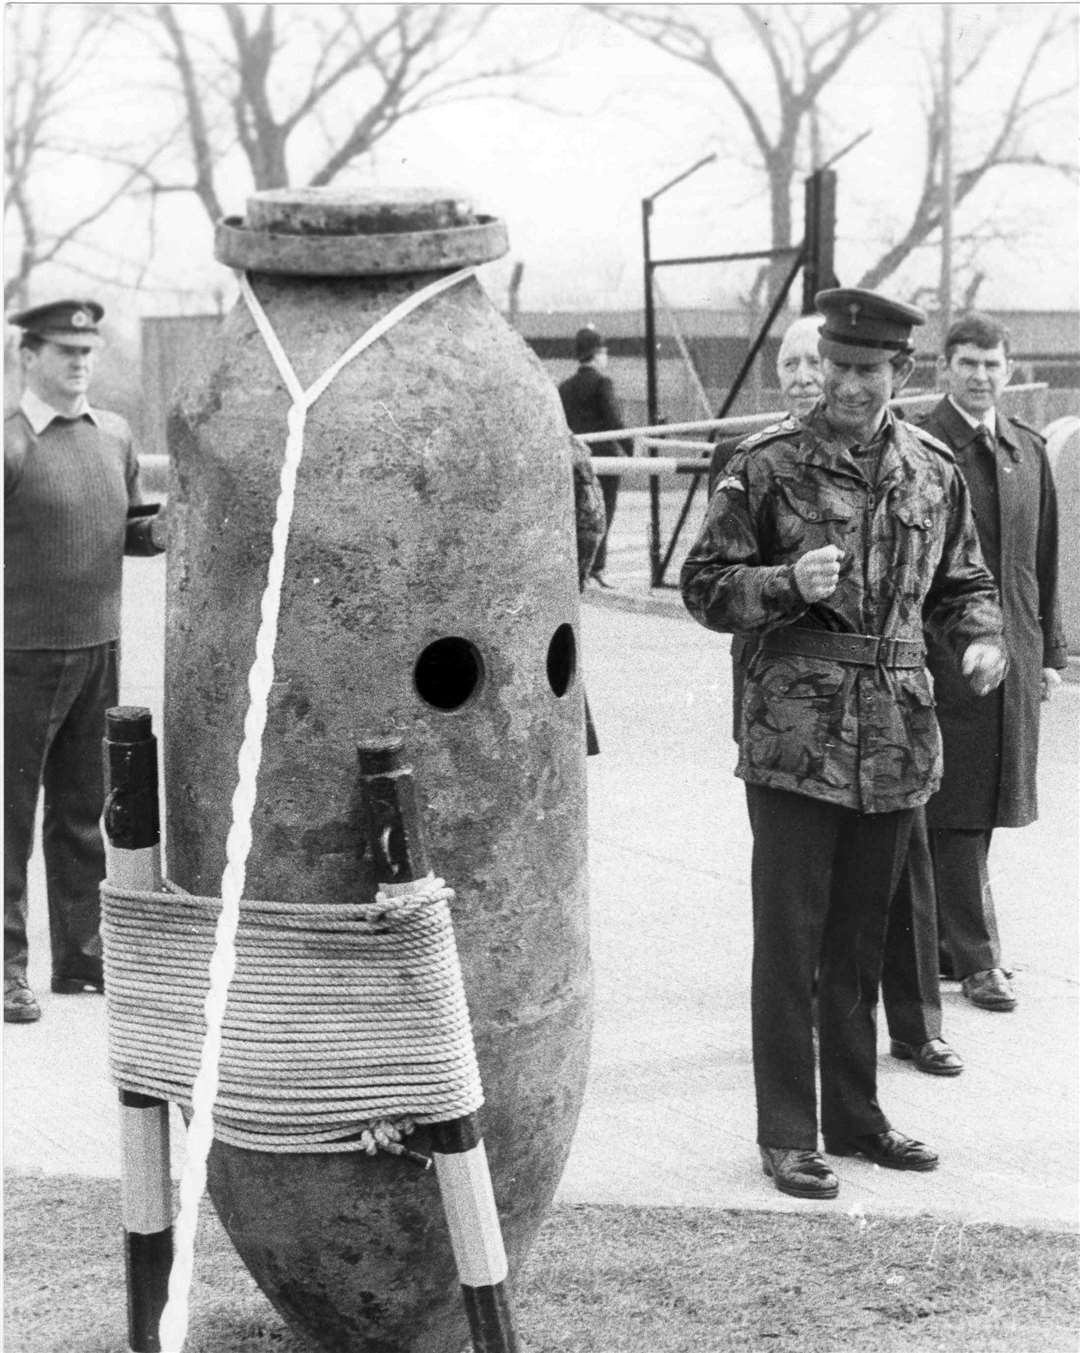 Prince Charles came face to face with this German bomb on a visit to the Royal Engineers at Chattenden, Gillingham. The bomb, nicknamed Hermann, had recently been defused in Sheffield by the bomb squad from Chattenden